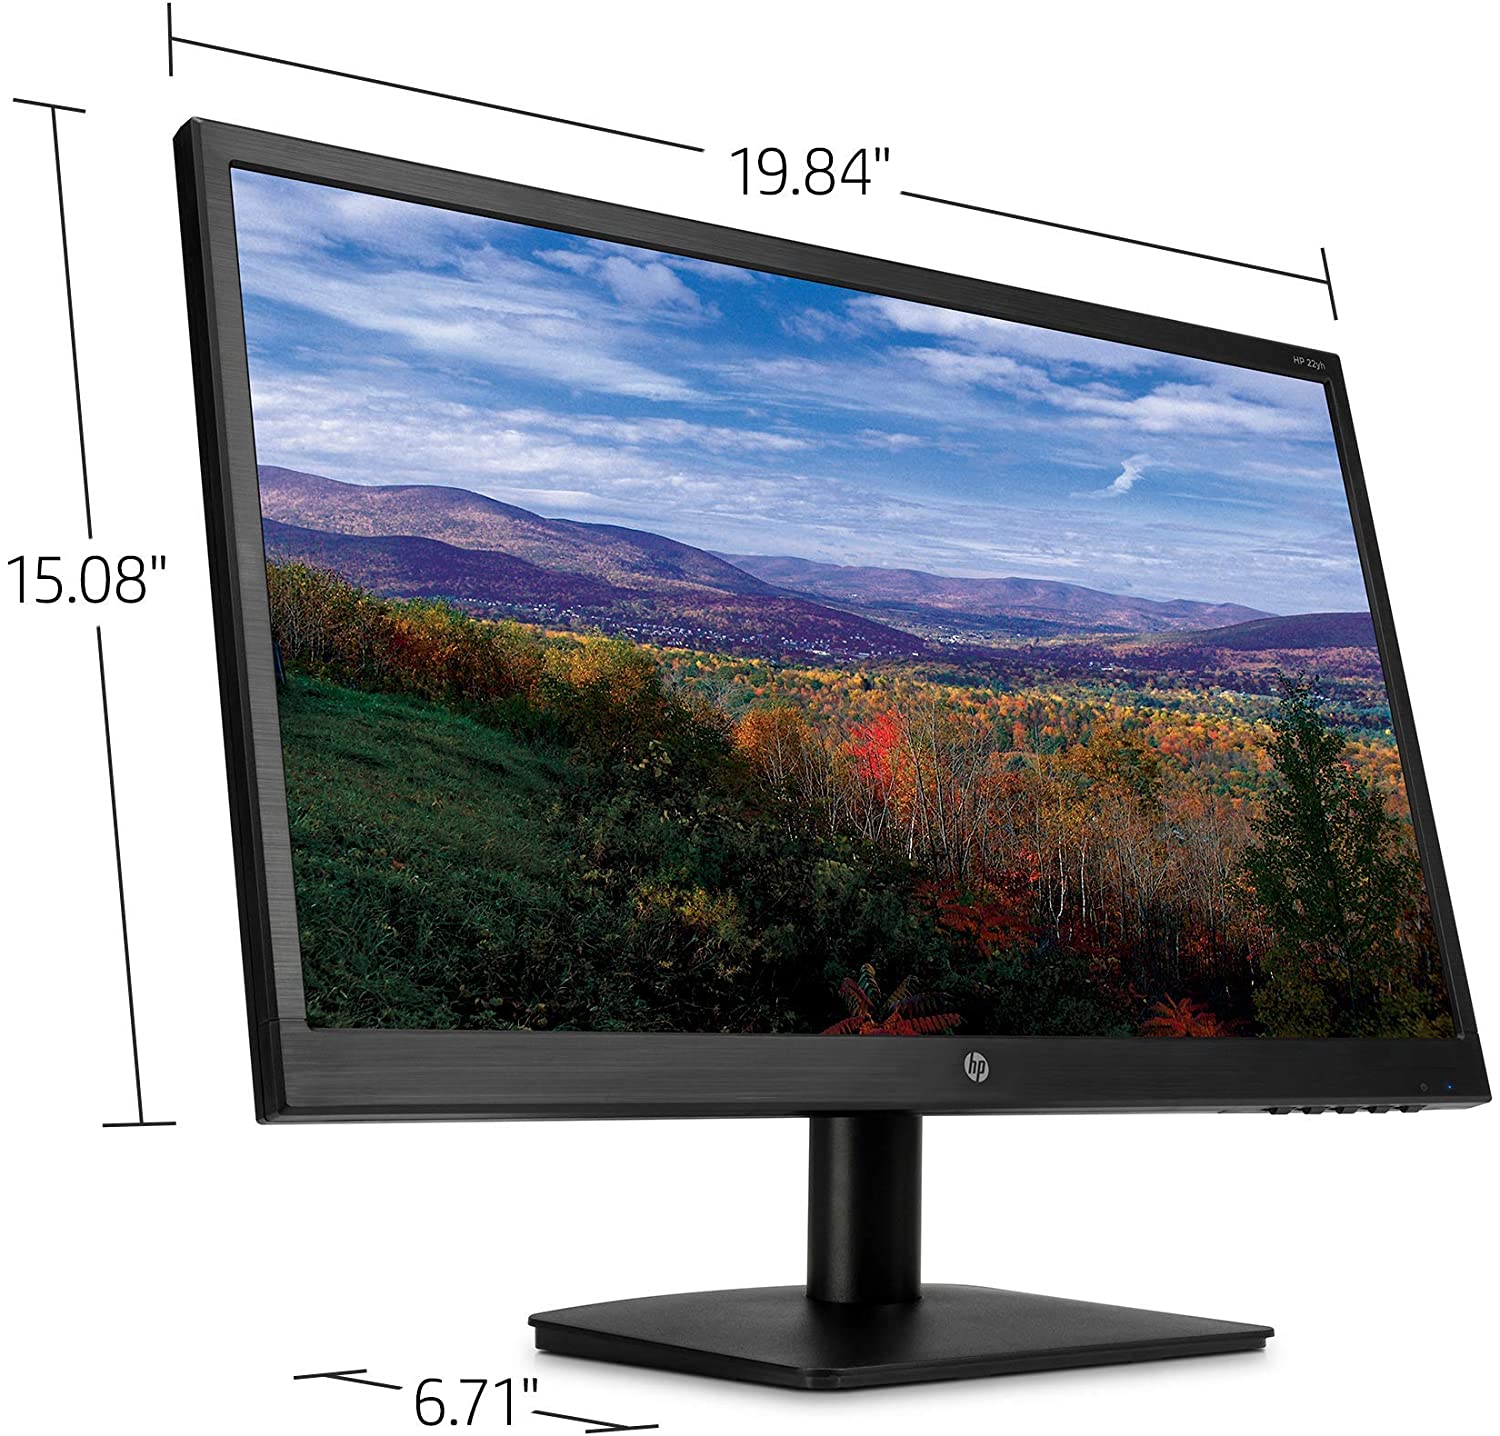 HP 21.5-inch FHD Monitor with Tilt Adjustment and Anti-glare Panel (22yh, Black)